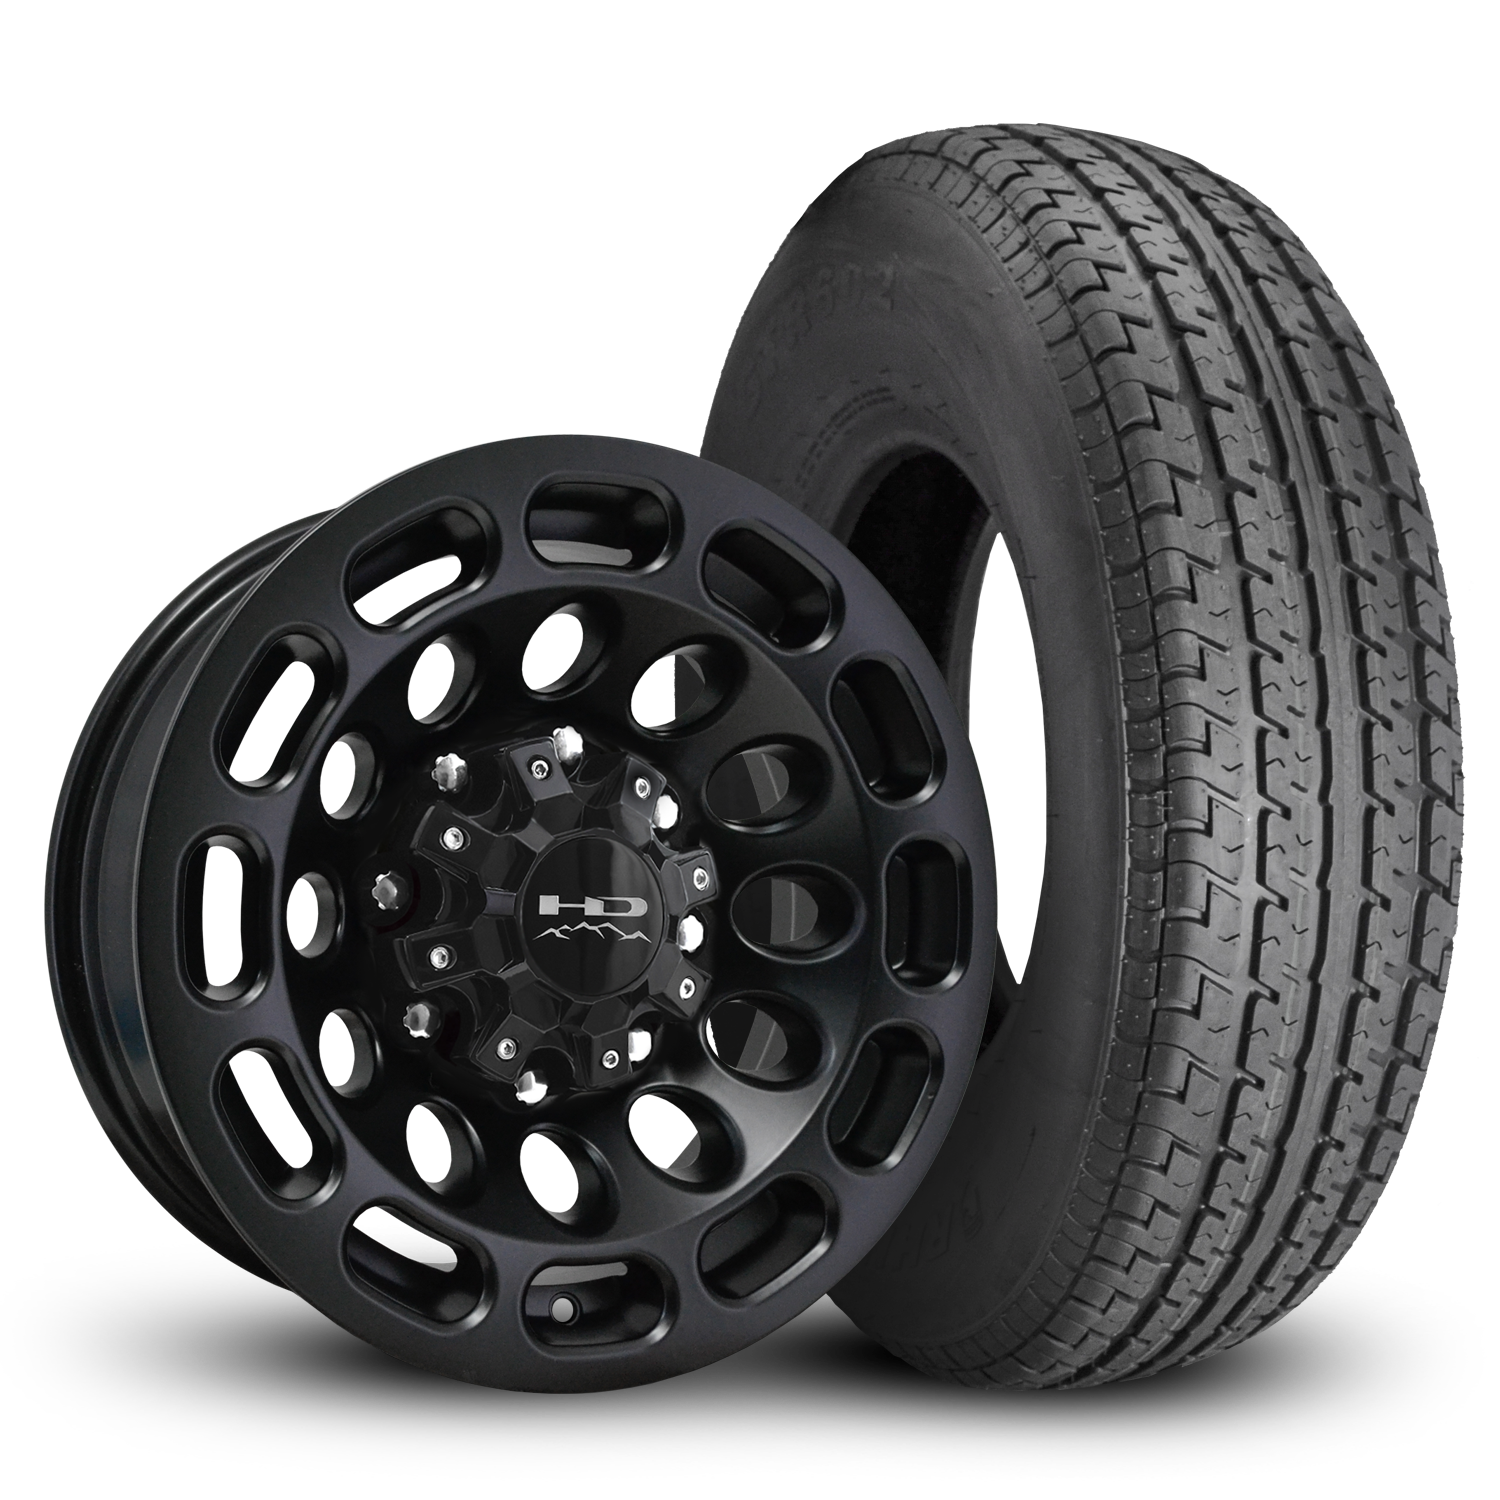 HD Off-Road Road Warrior Custom Trailer Wheel & Tire packages in 16x6.0 in 8 lug All Satin Black for Unility, Boat, Car, Construction, Horse, & RV